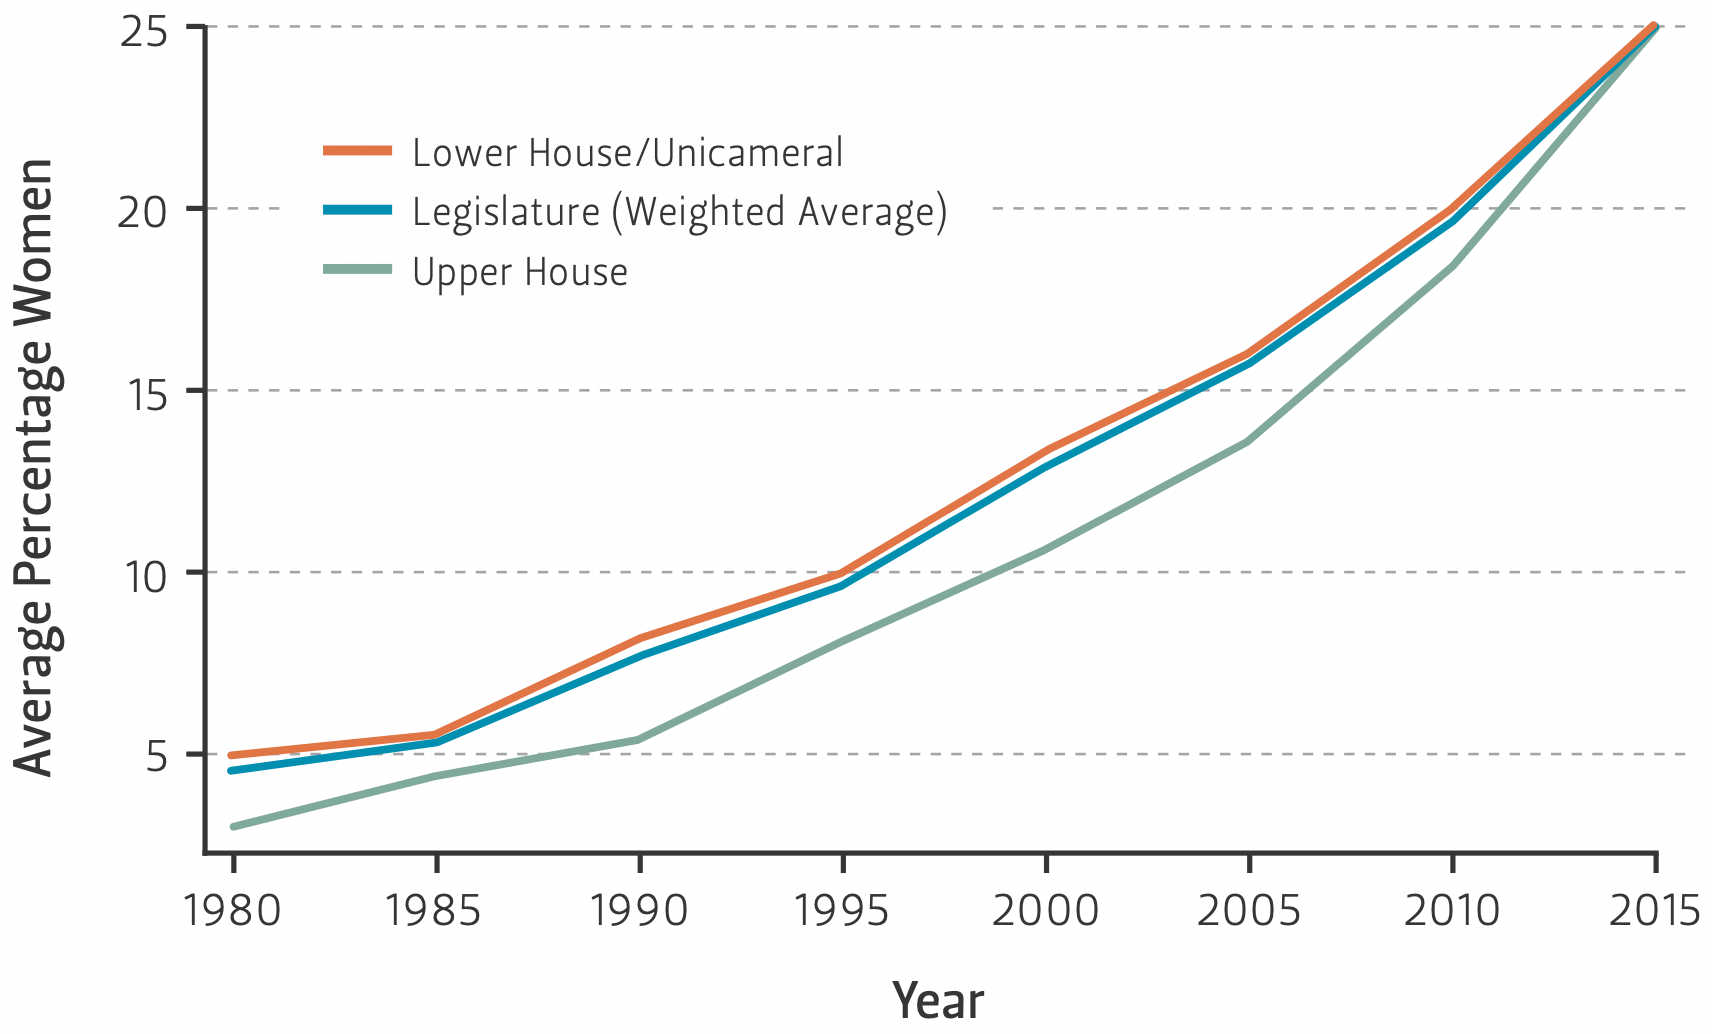 This graph shows participation of women in Latin American legislatures over time.